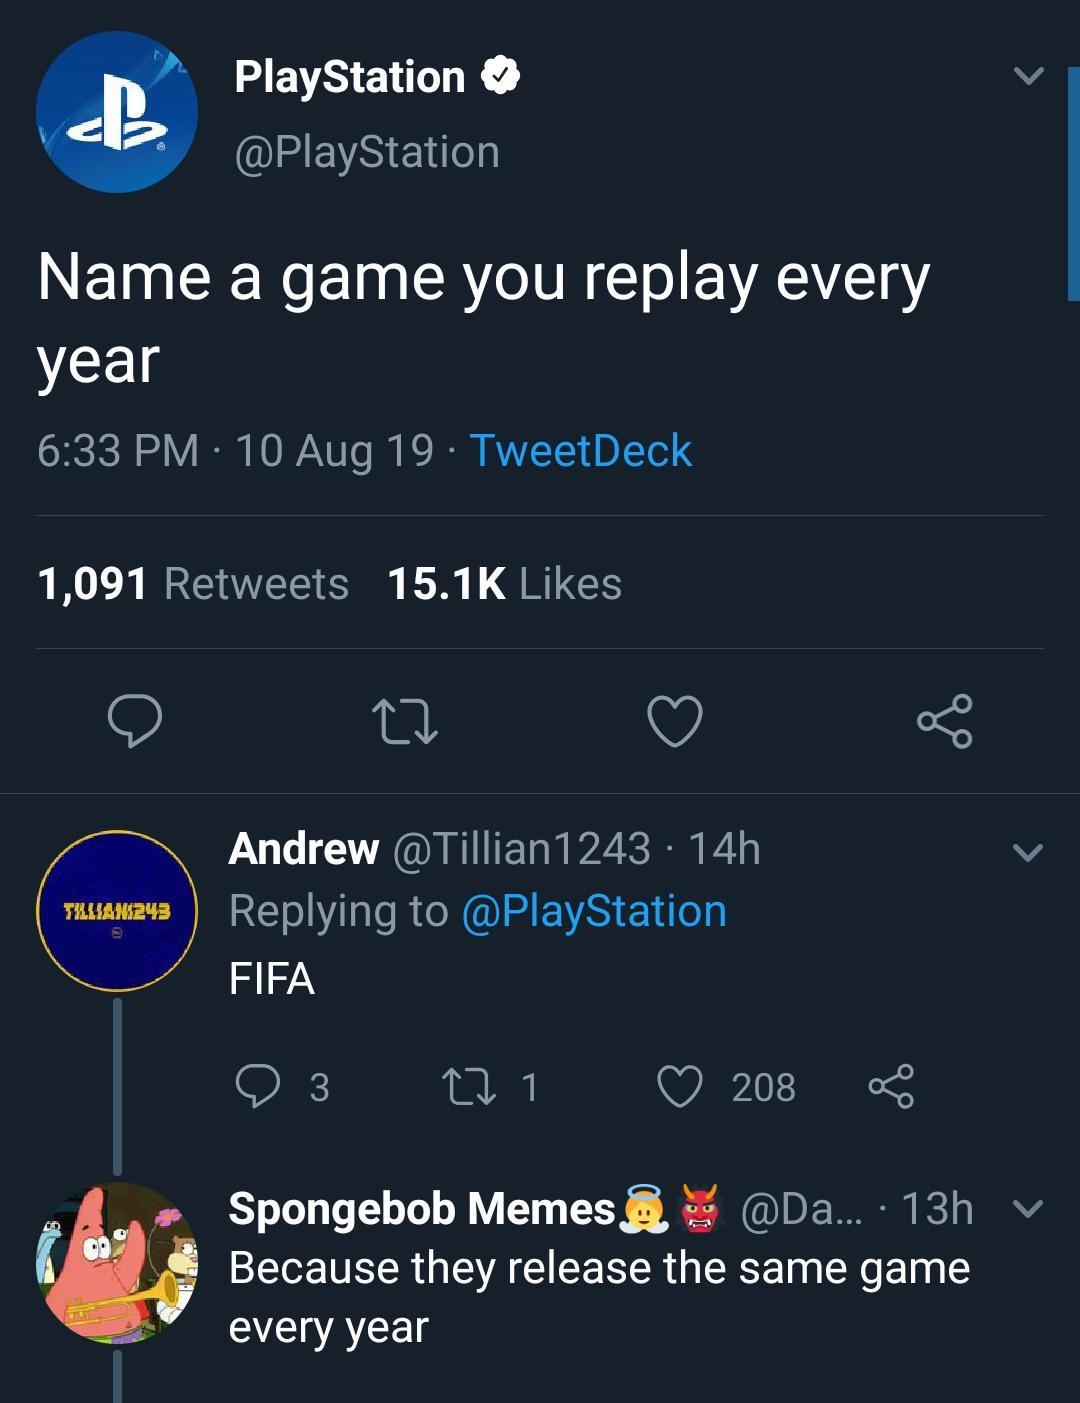 playstation 4 - PlayStation Name a game you replay every year 10 Aug 19. TweetDeck 1,091 22 TALLIAN243 Andrew 14h. Fifa 03 221 208 8 Spongebob Memes ... 13h v Because they release the same game every year